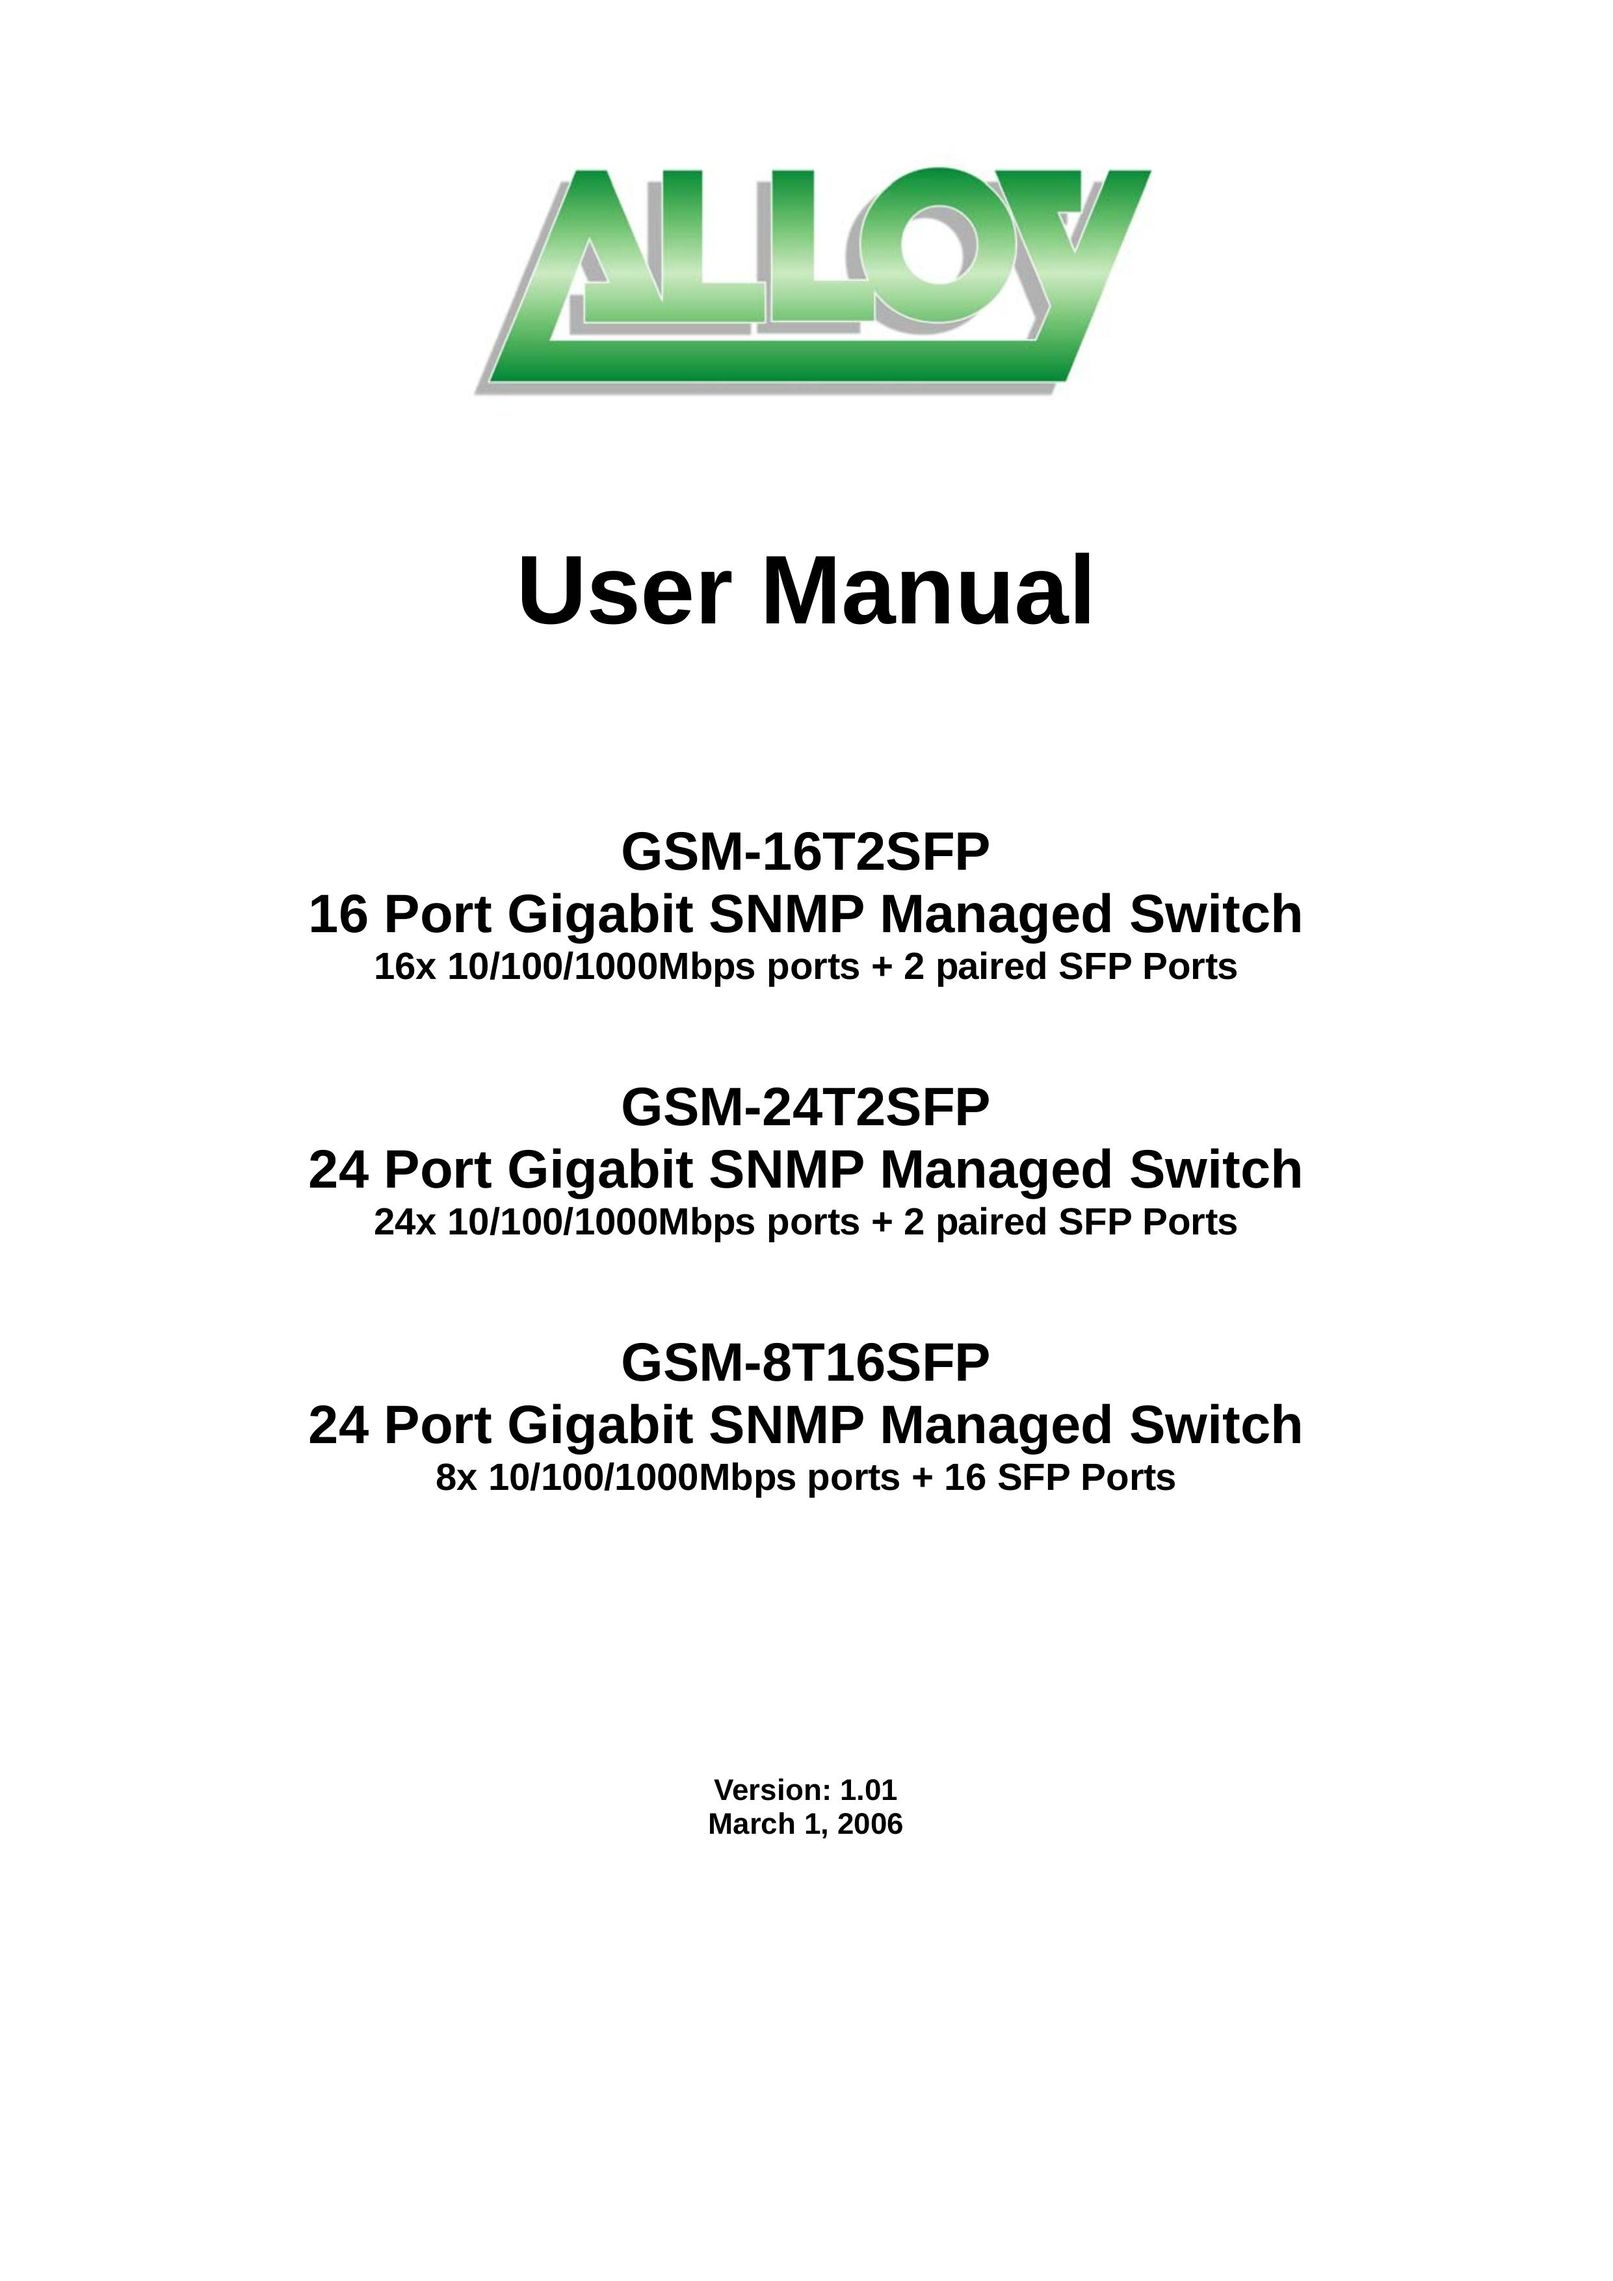 Alloy Computer Products GSM-24T2SFP Switch User Manual